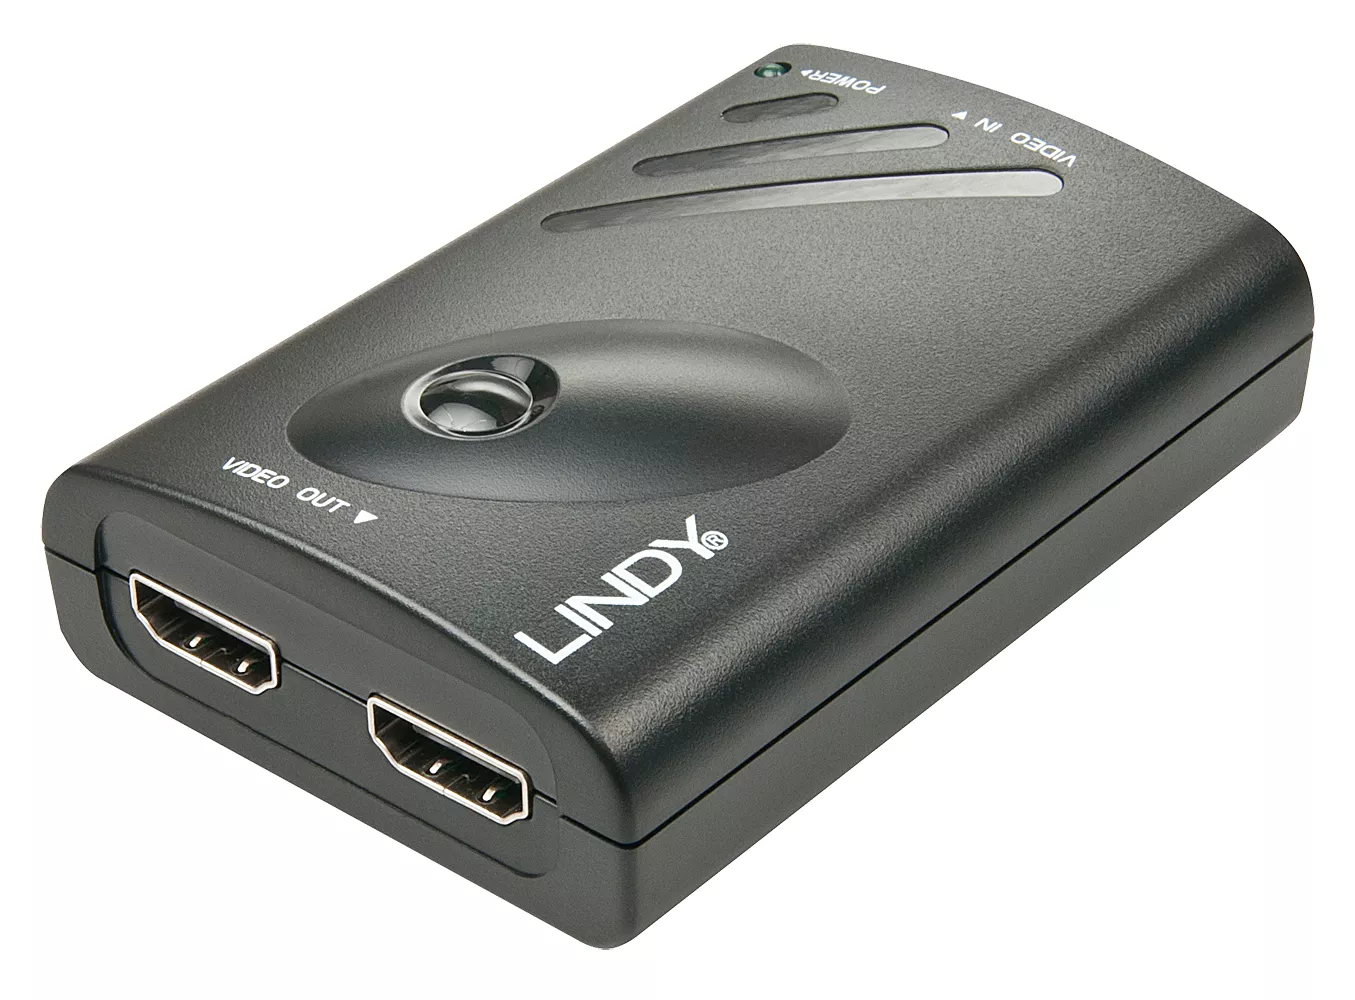 Vente Câble Audio LINDY DP 1.2 to 2x HDMI Converter with Expander Function